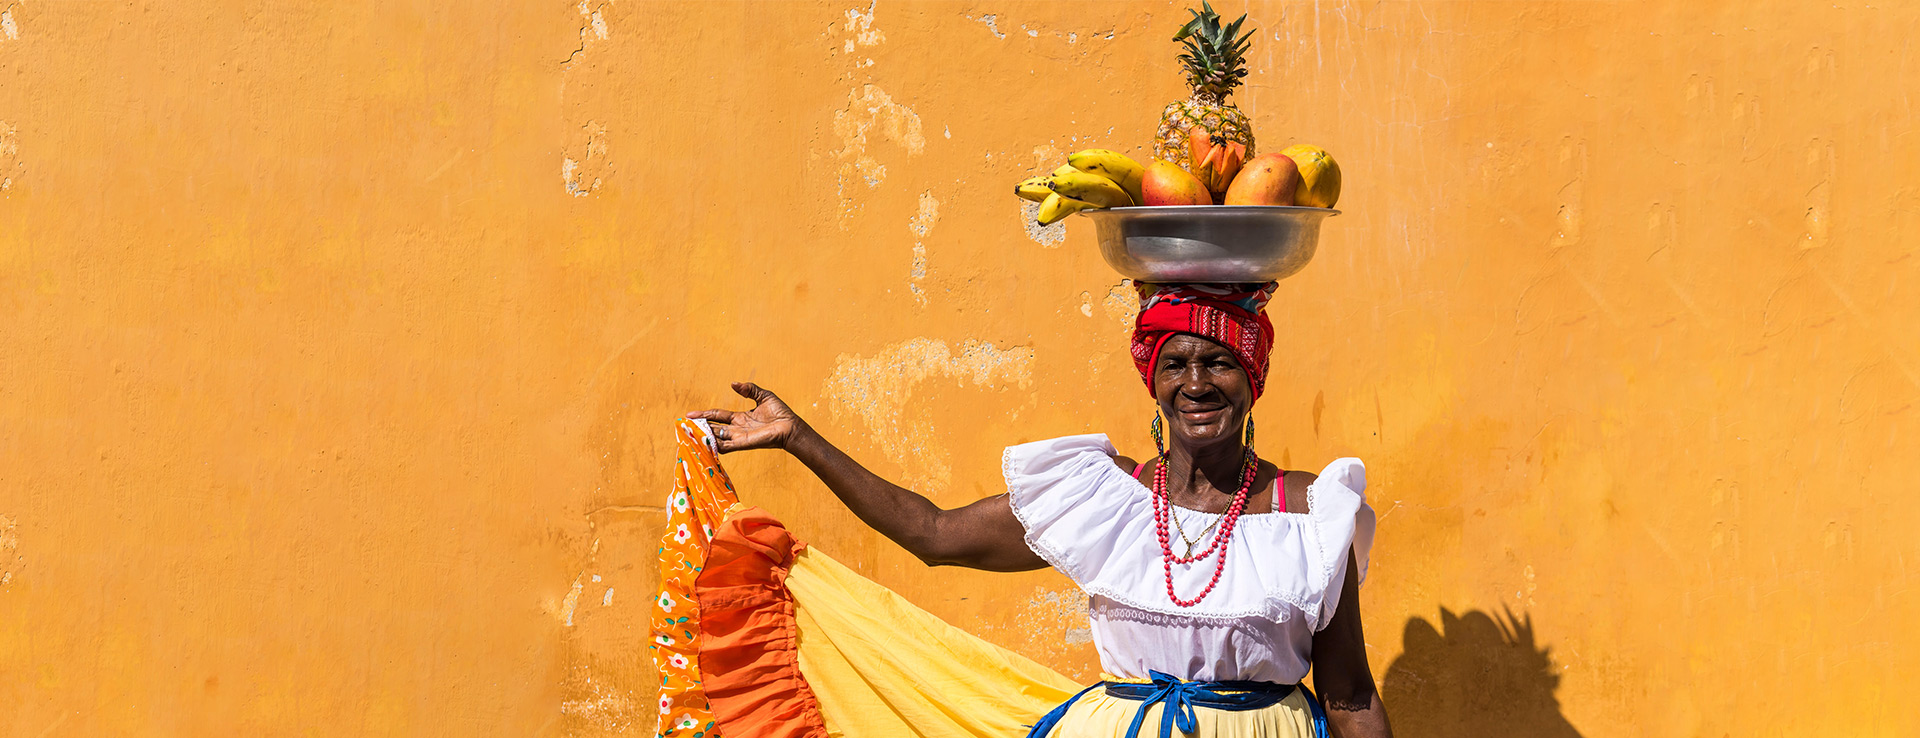 Woman carries fruit on head in front of orange wall